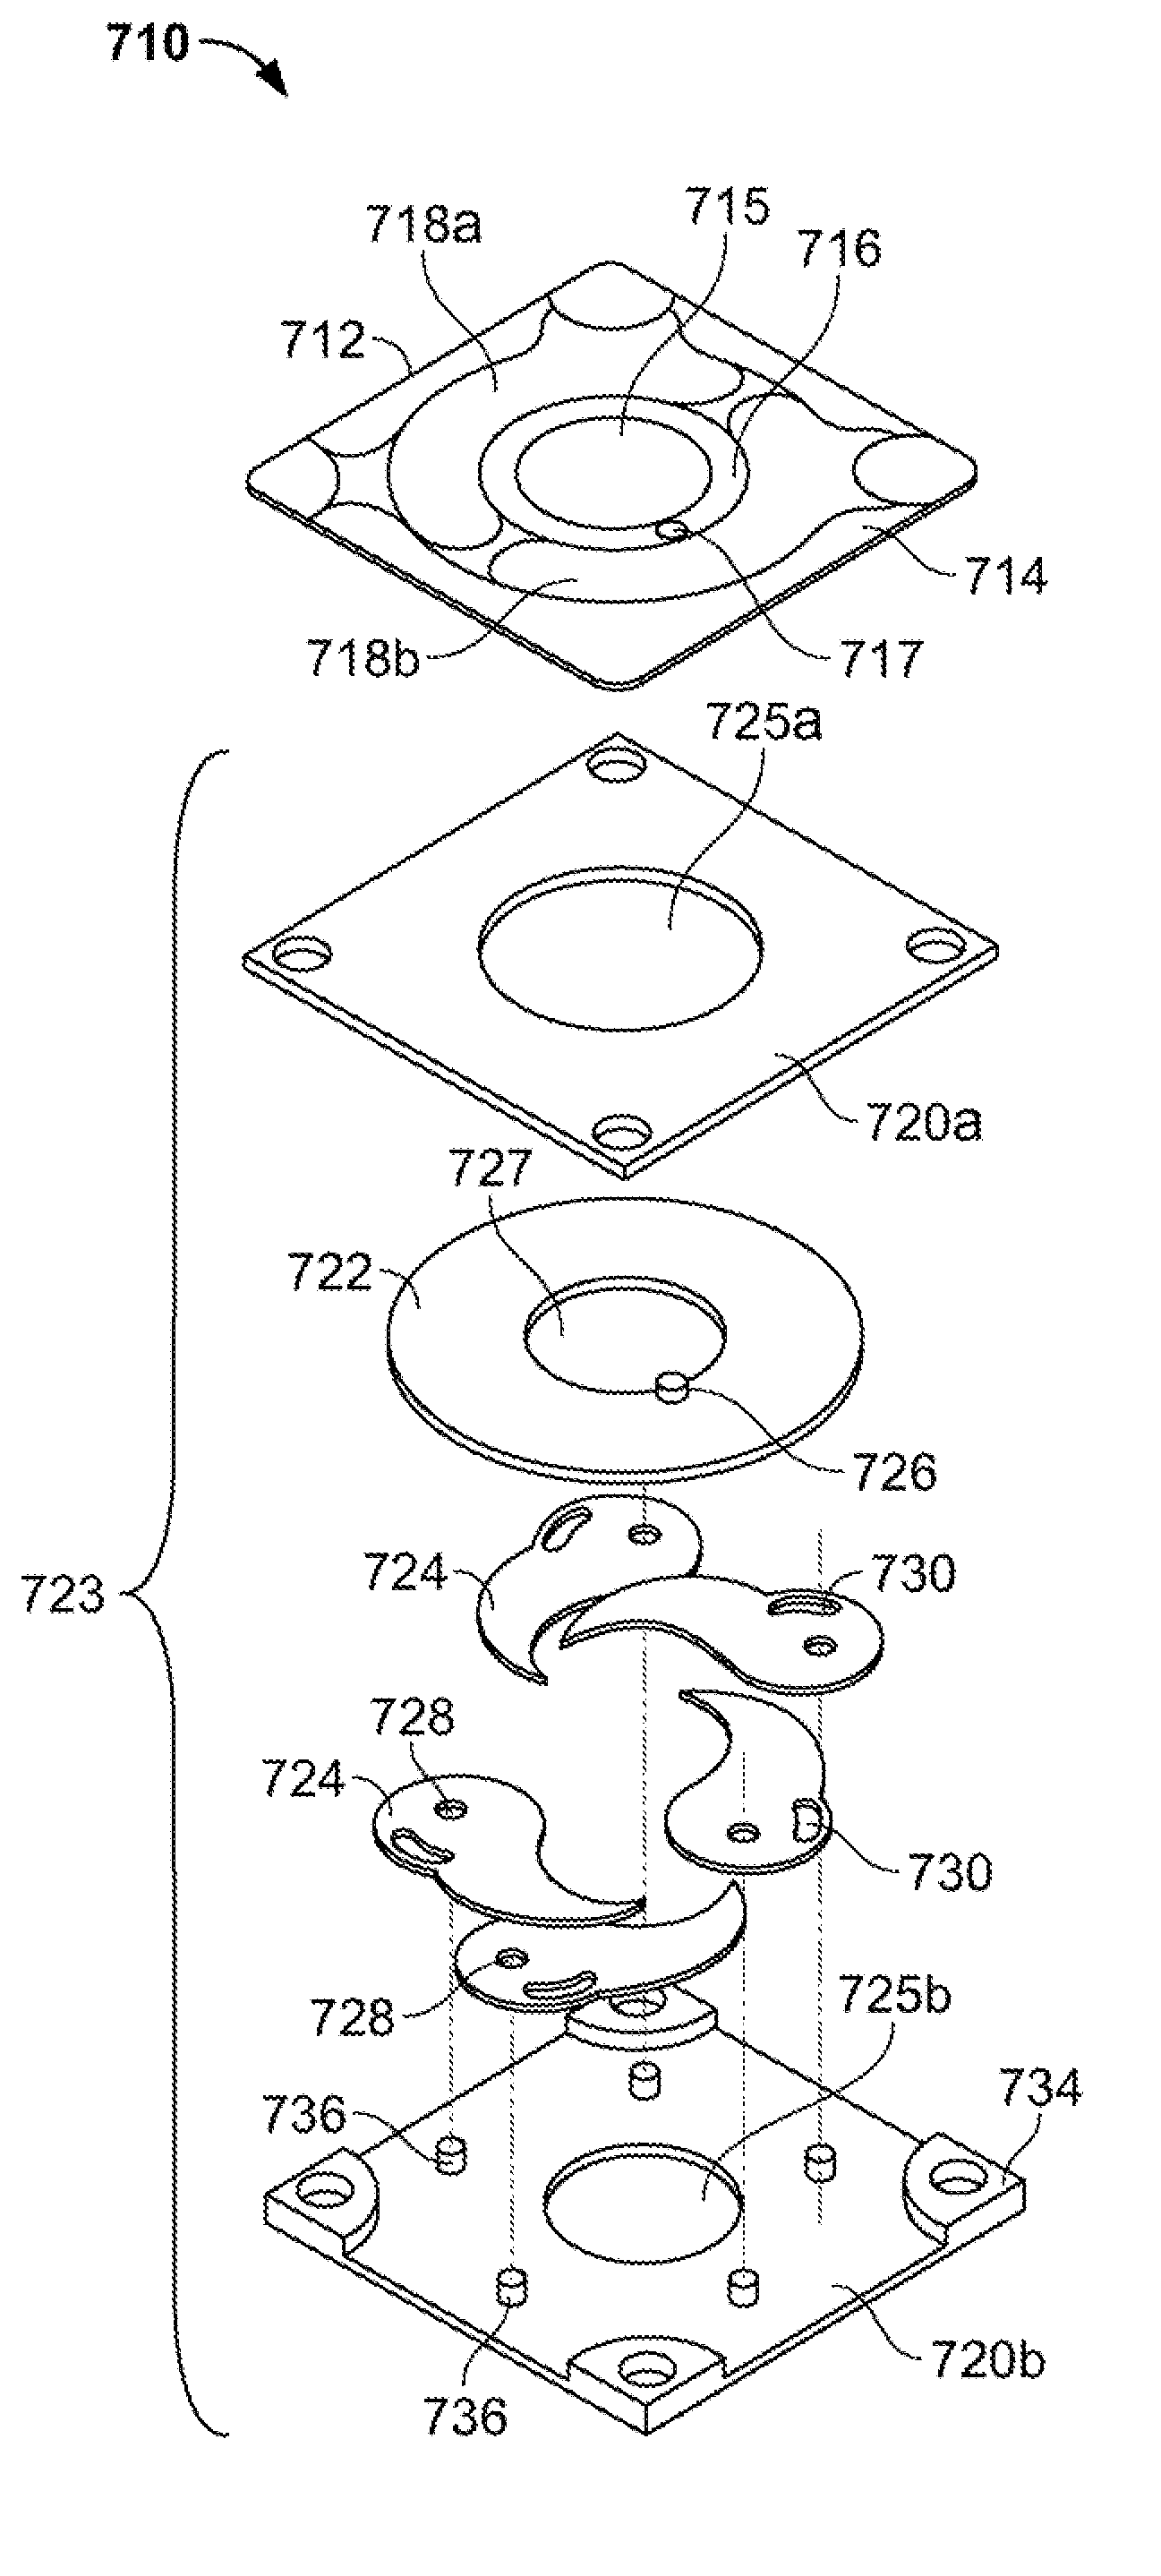 Lens shutter and aperture control devices